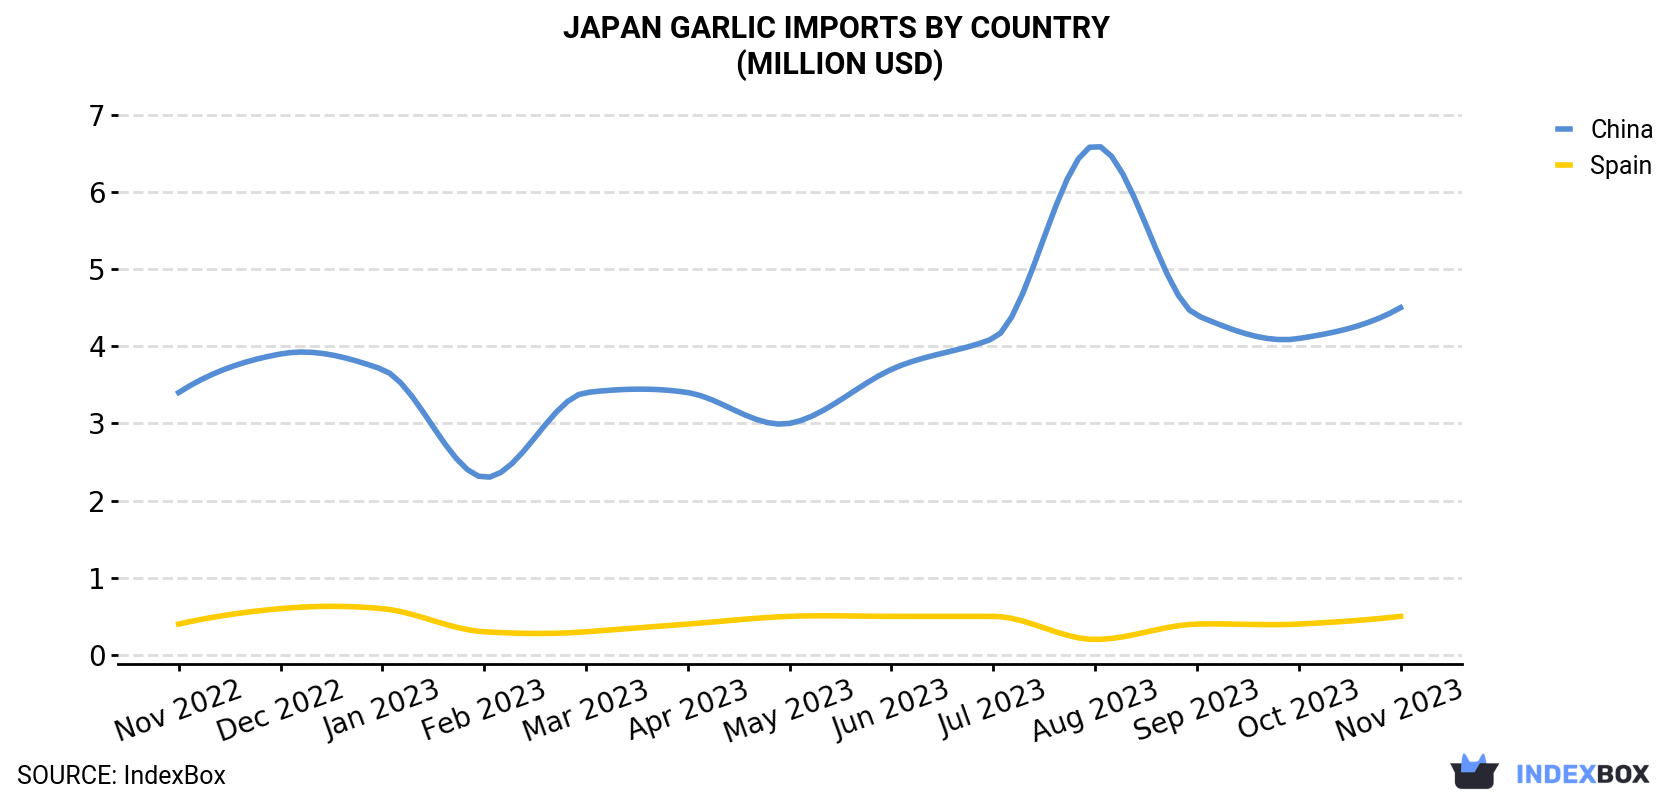 Japan Garlic Imports By Country (Million USD)